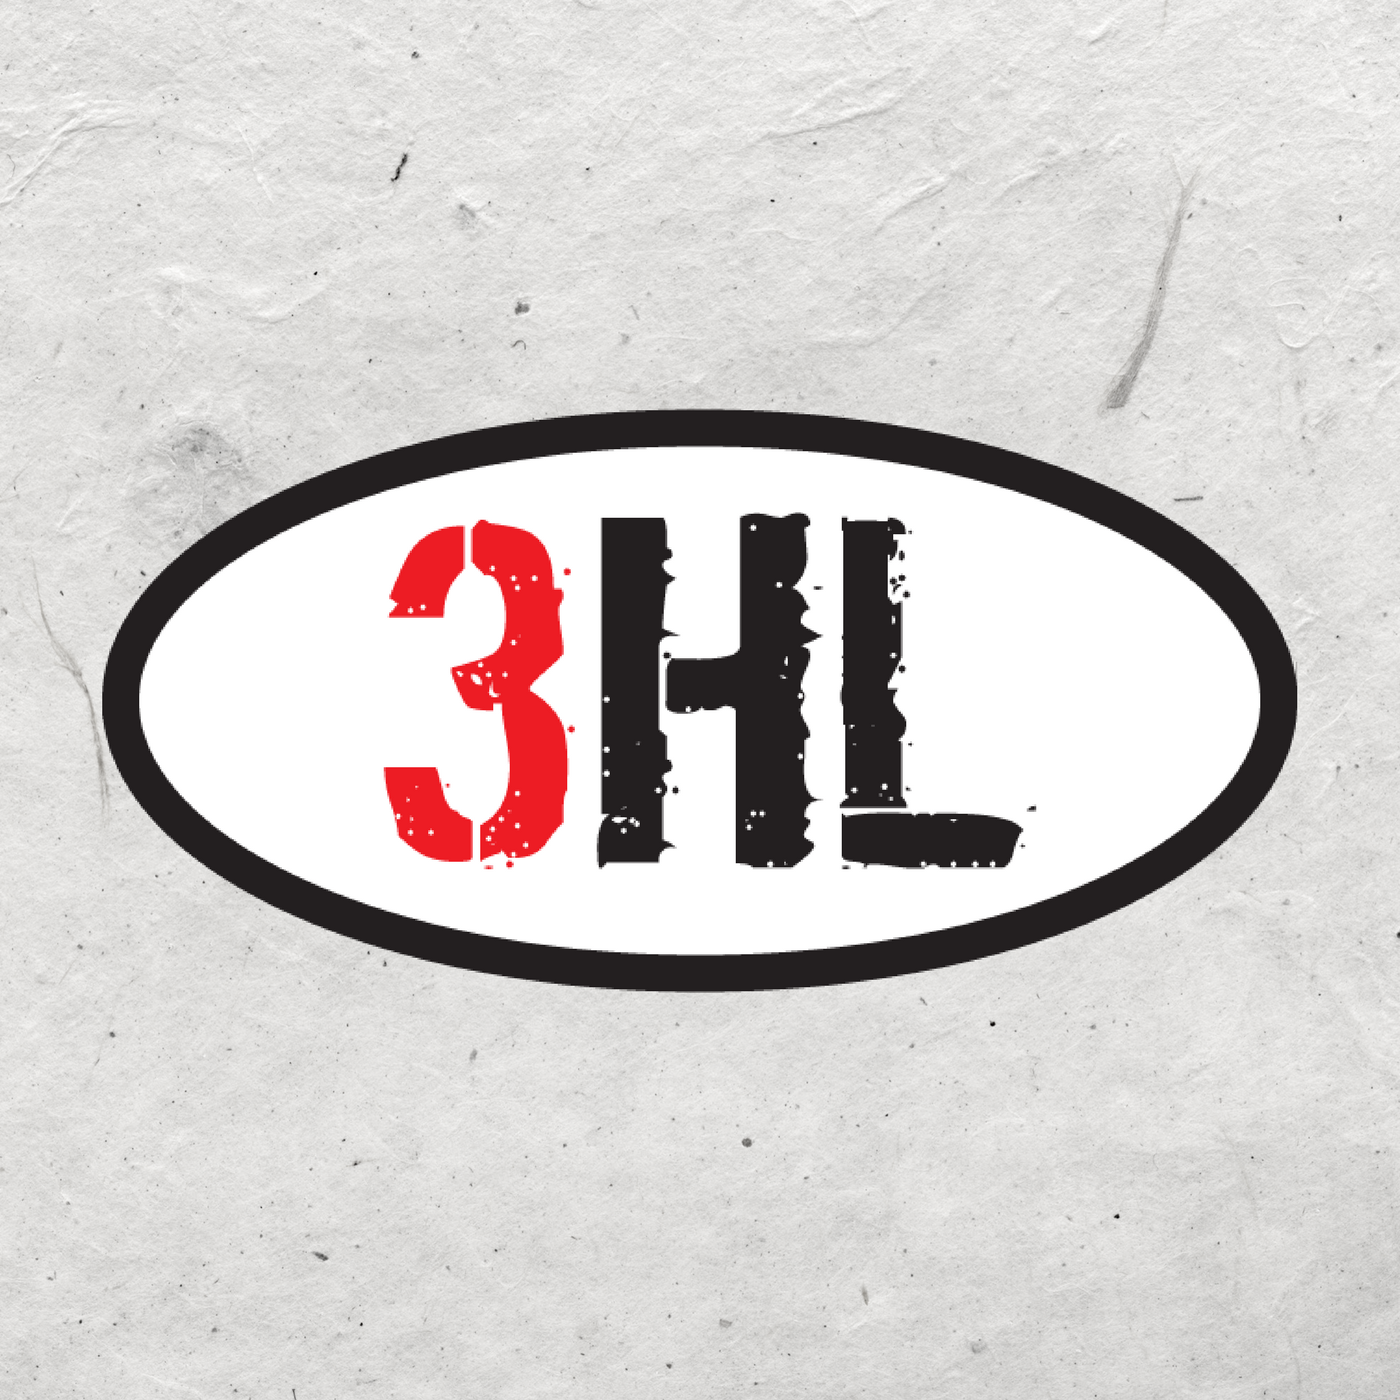 Jeff Jarrett on 3HL - We Need to Get Slay in the Ring